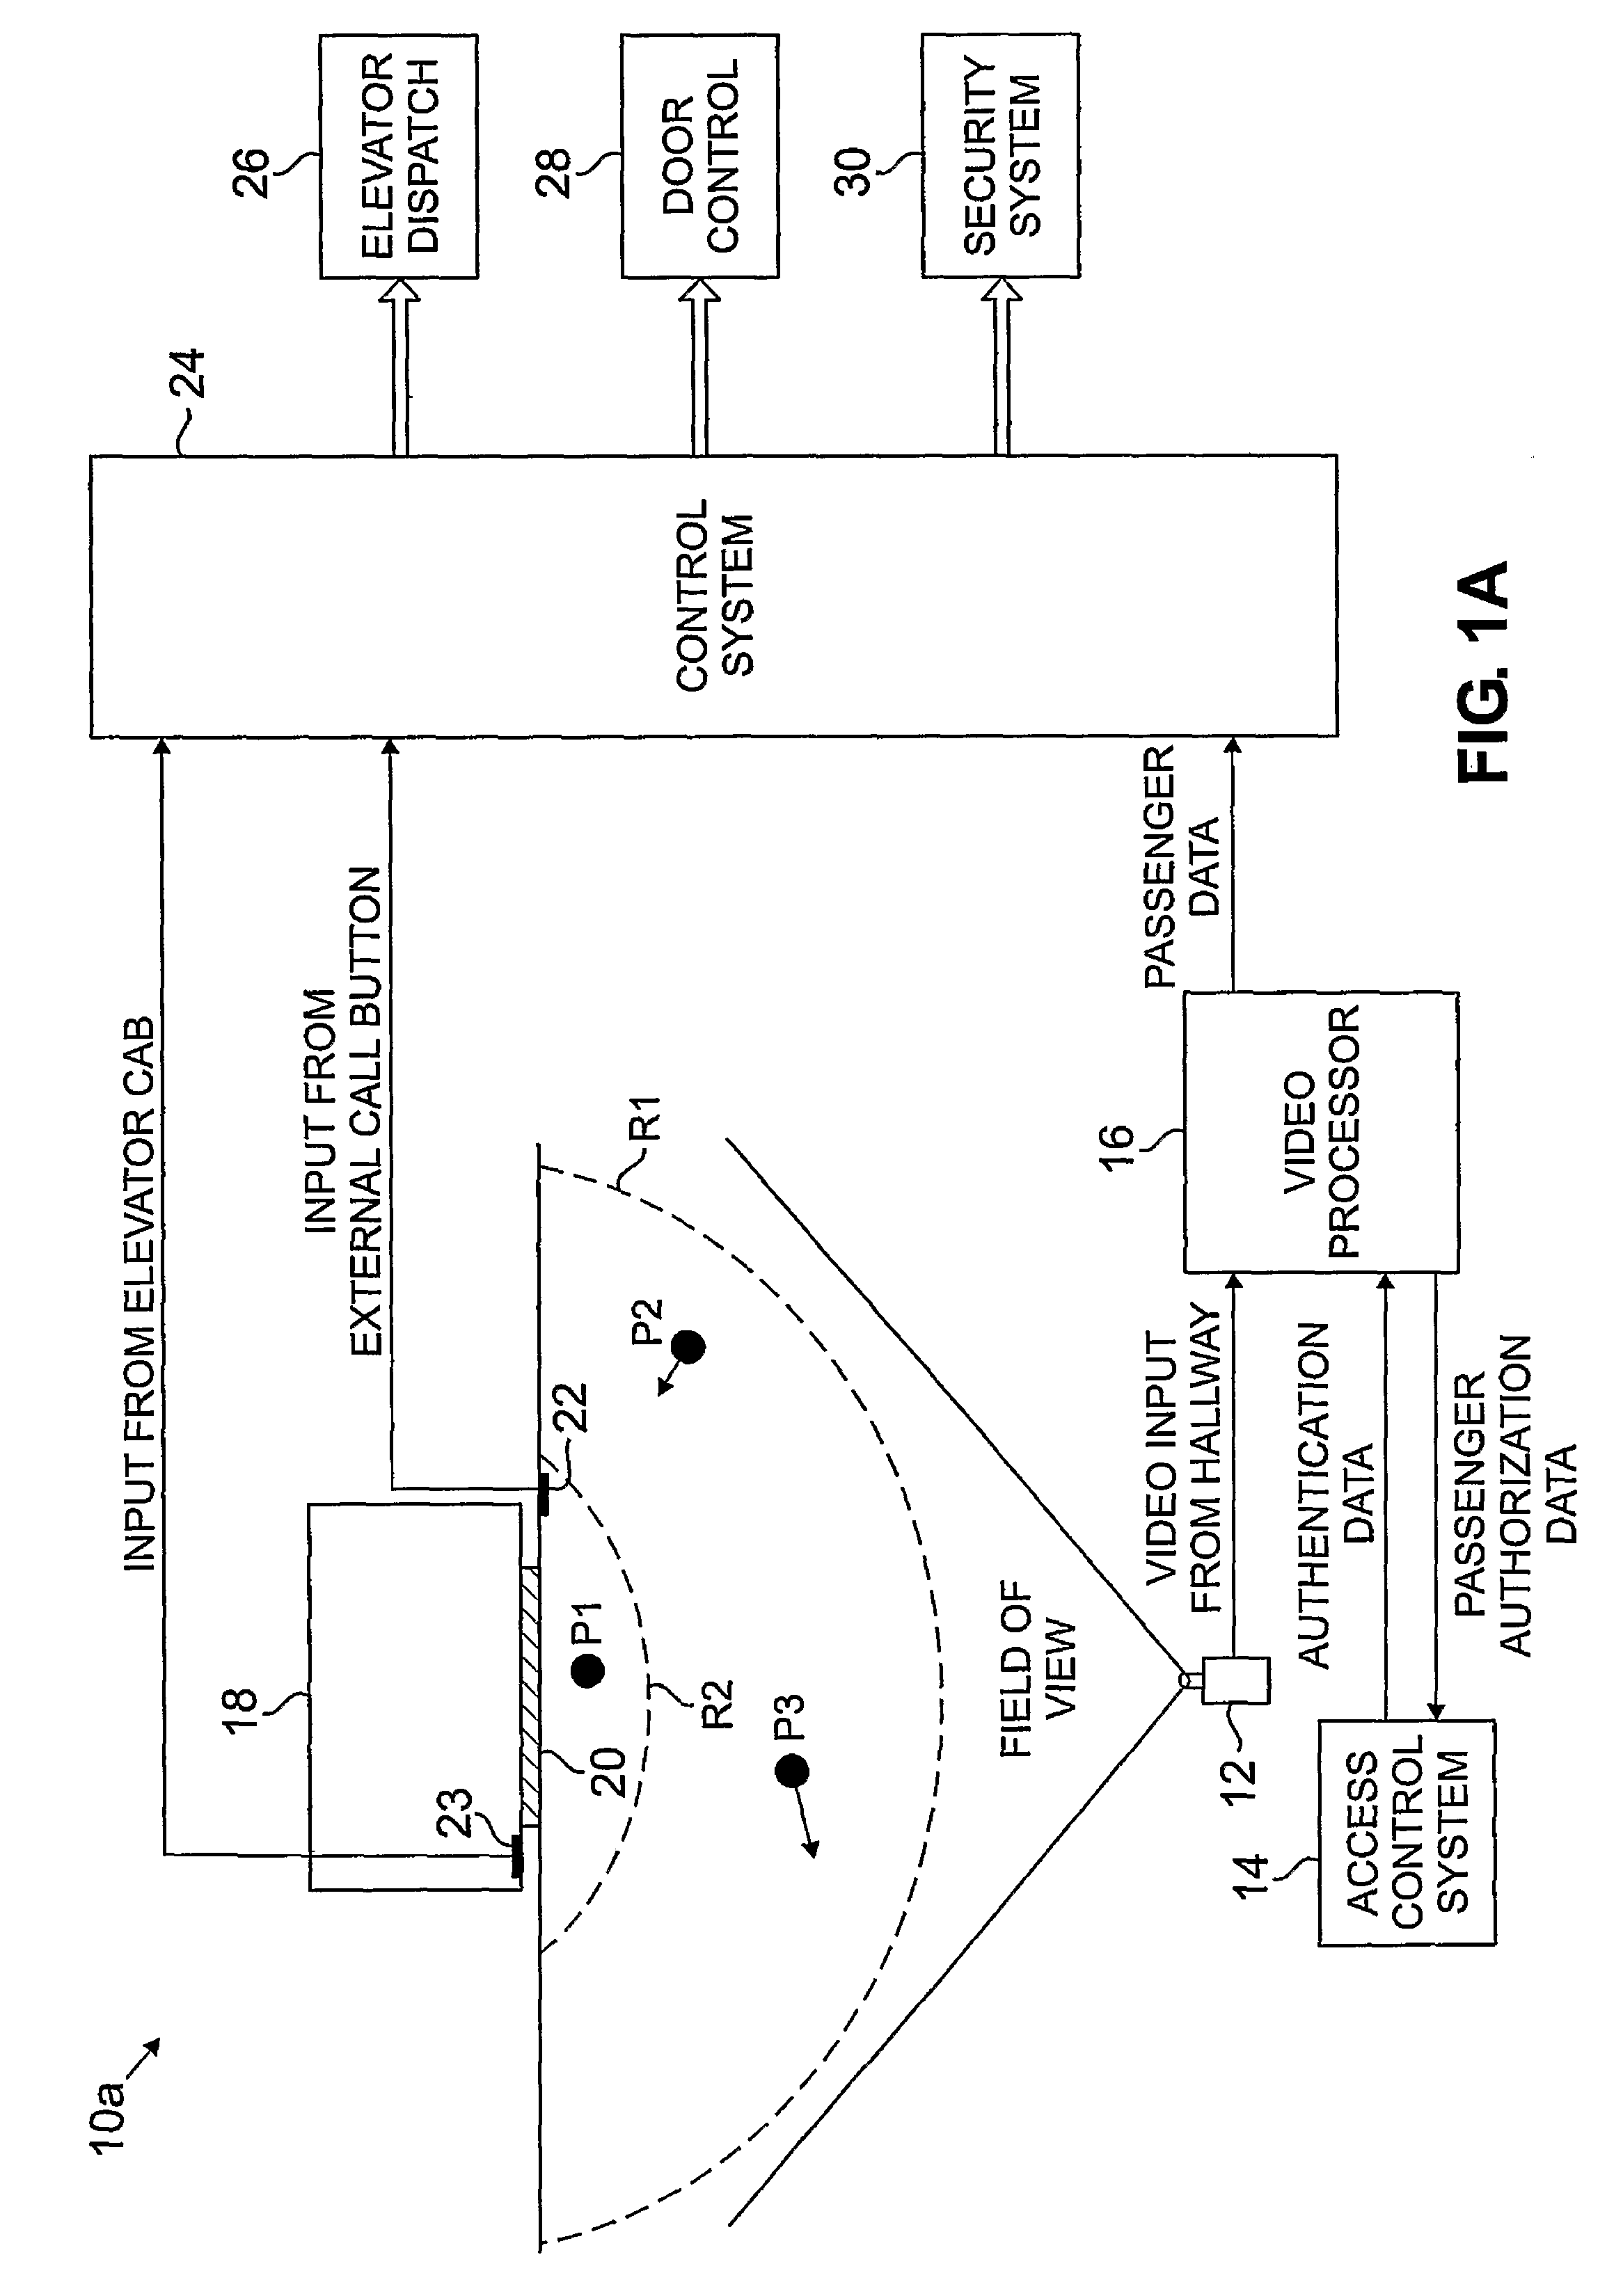 Video aided system for elevator control